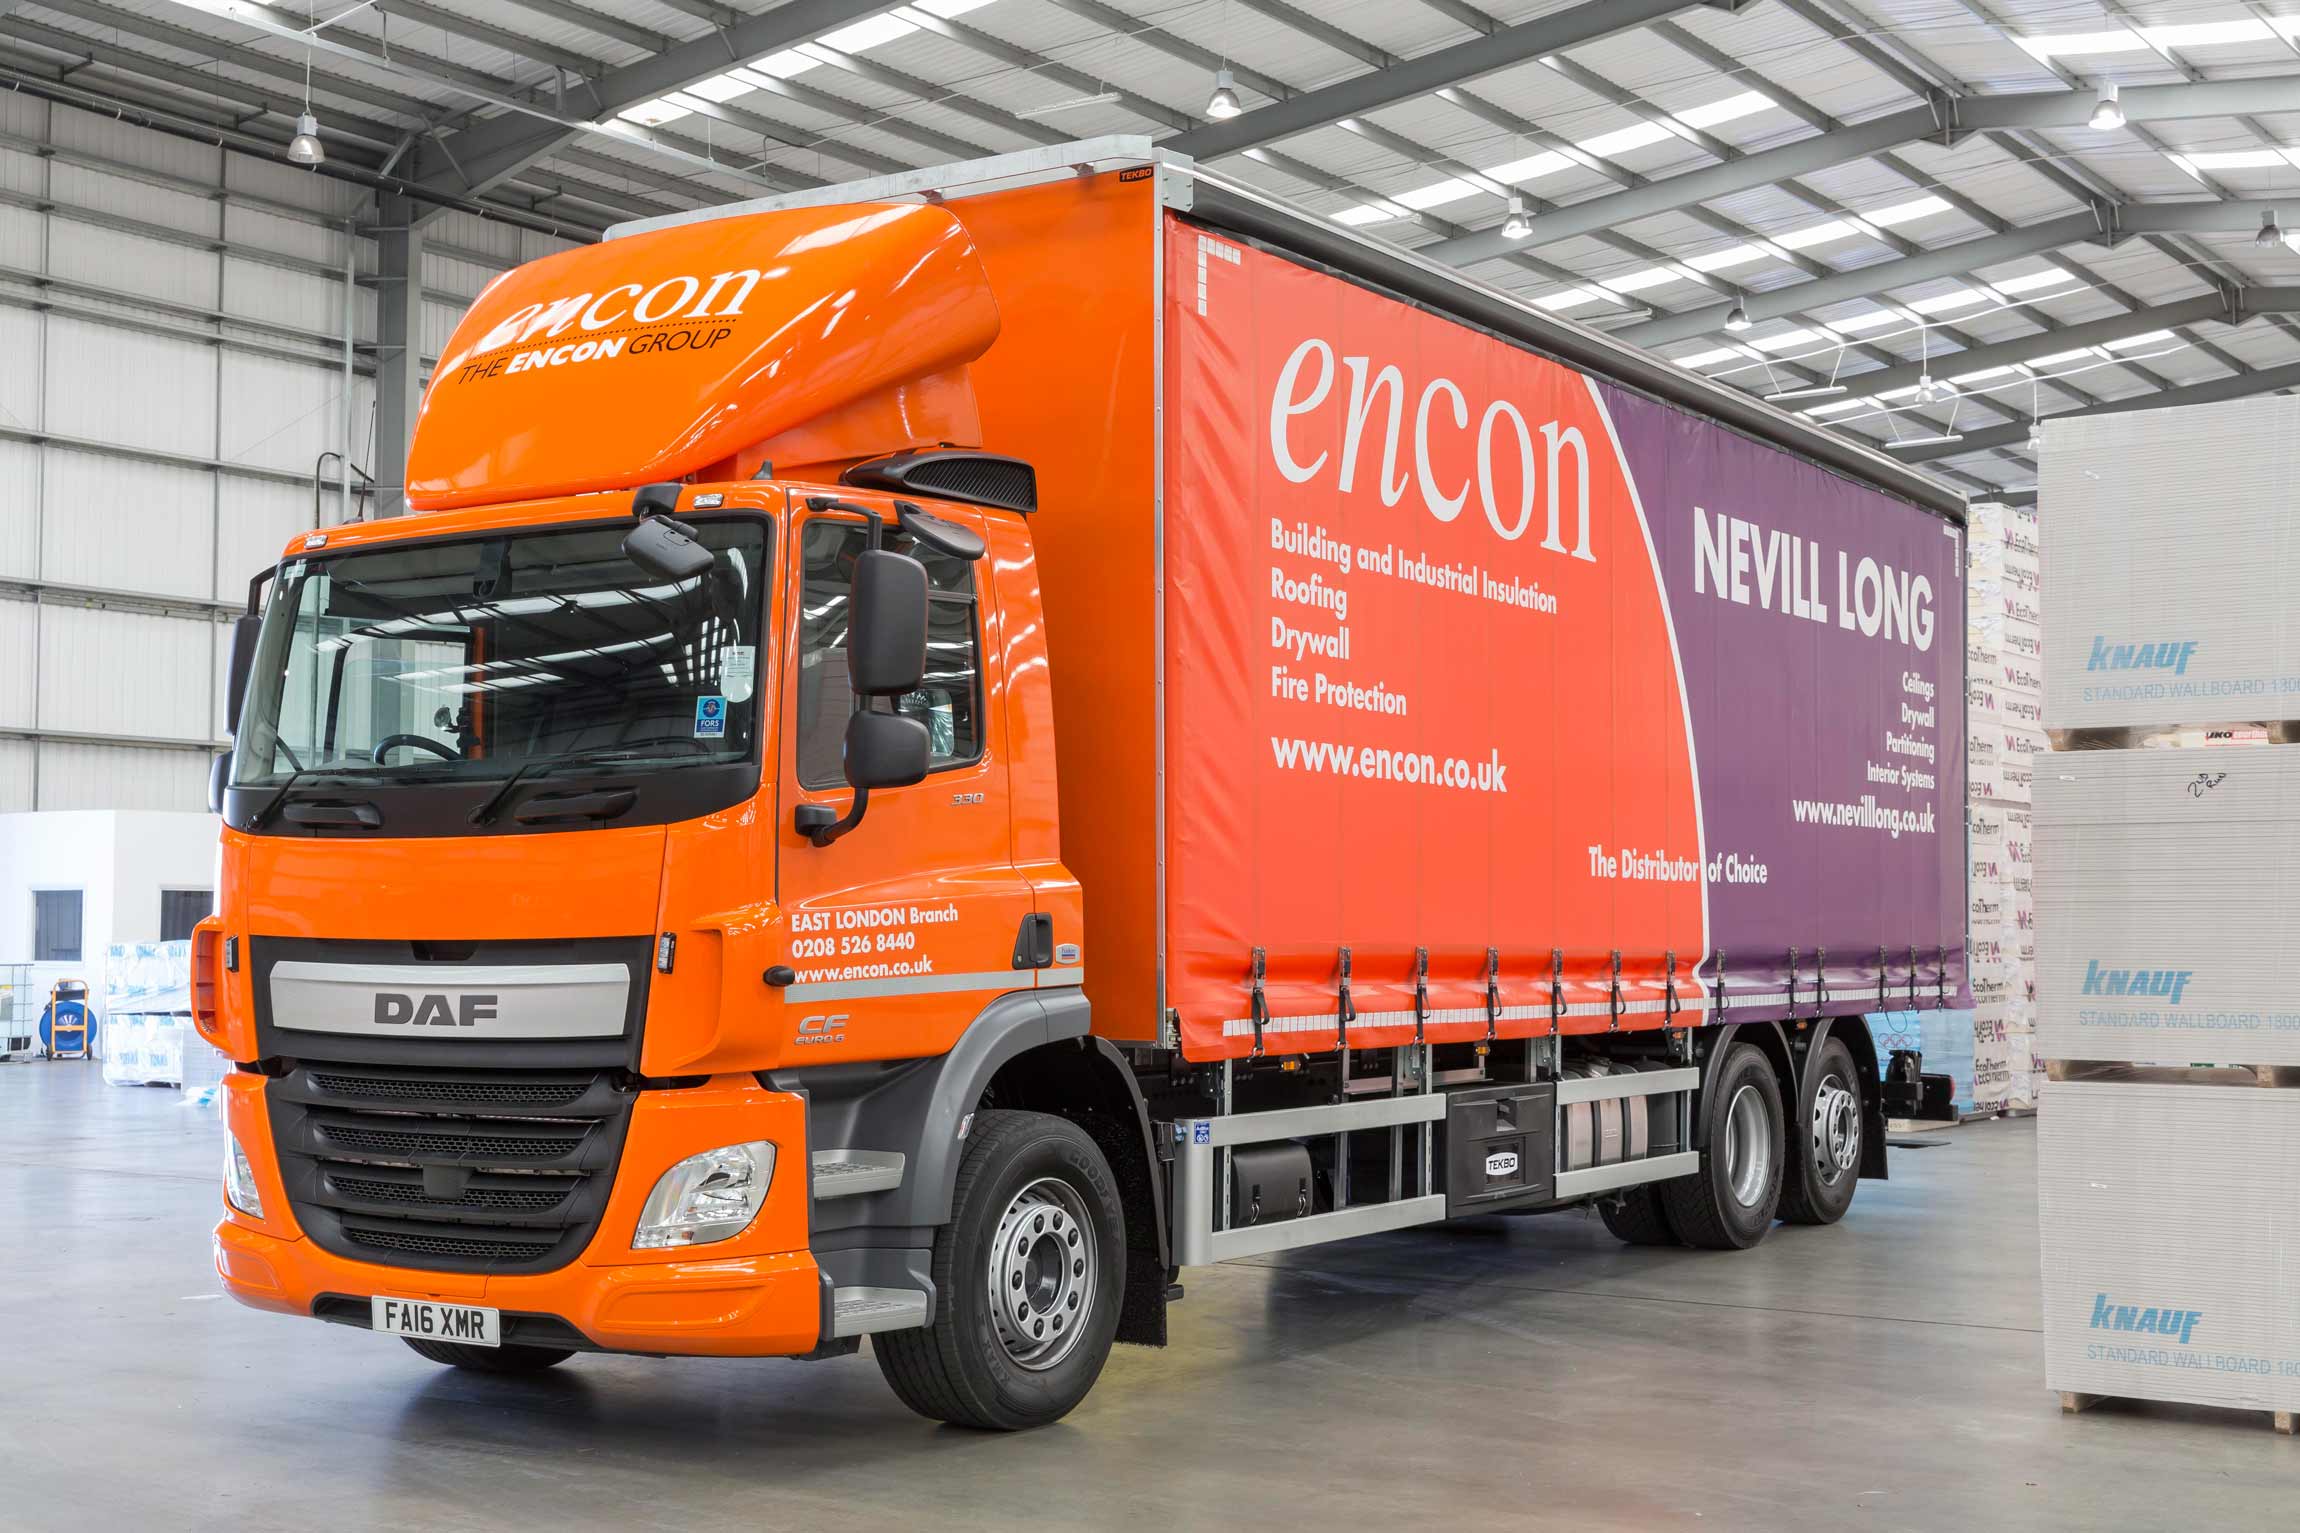 The Encon Group employs around 600 people, with its Head Office in Wetherby, West Yorkshire and operates 24 sites throughout the UK